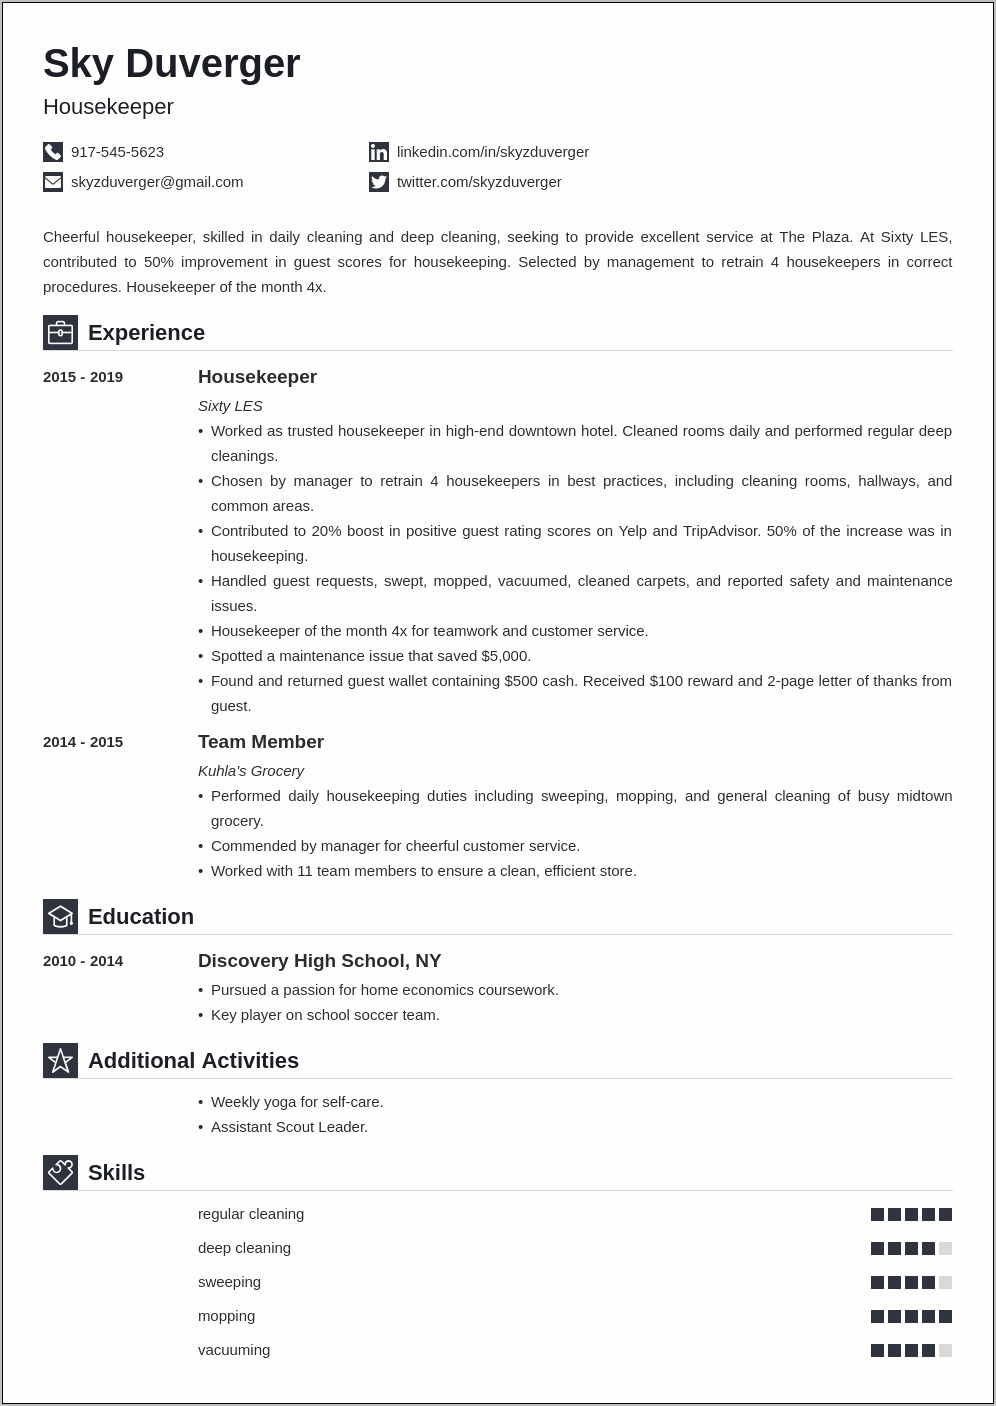 Housekeeping Resume With No Experience Pdf